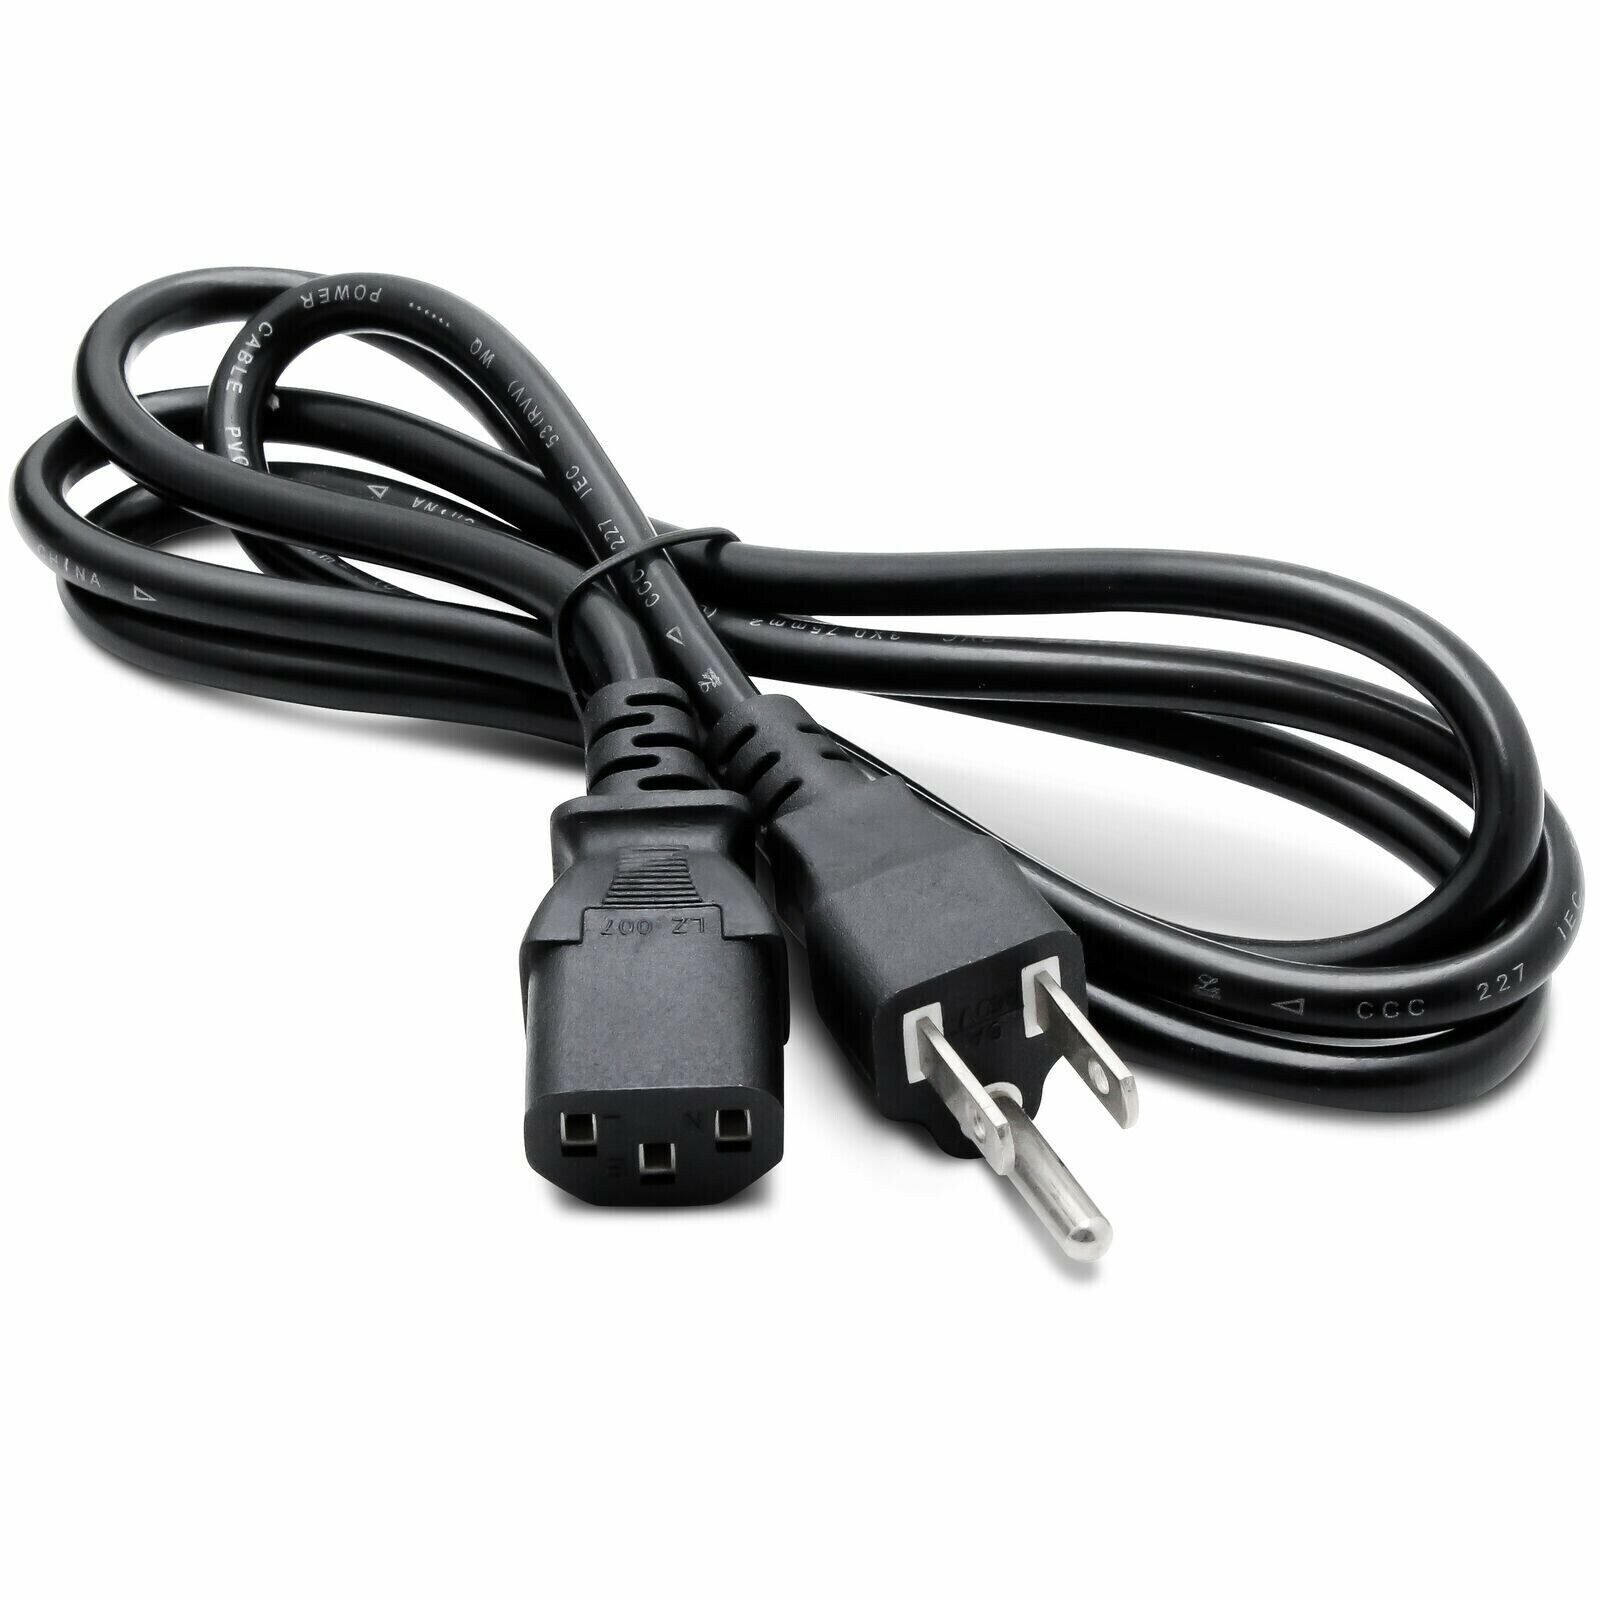 5ft ETL 3-Prong Power Cable AC Cord for Pressure Cookers Rice Cooker Appliances